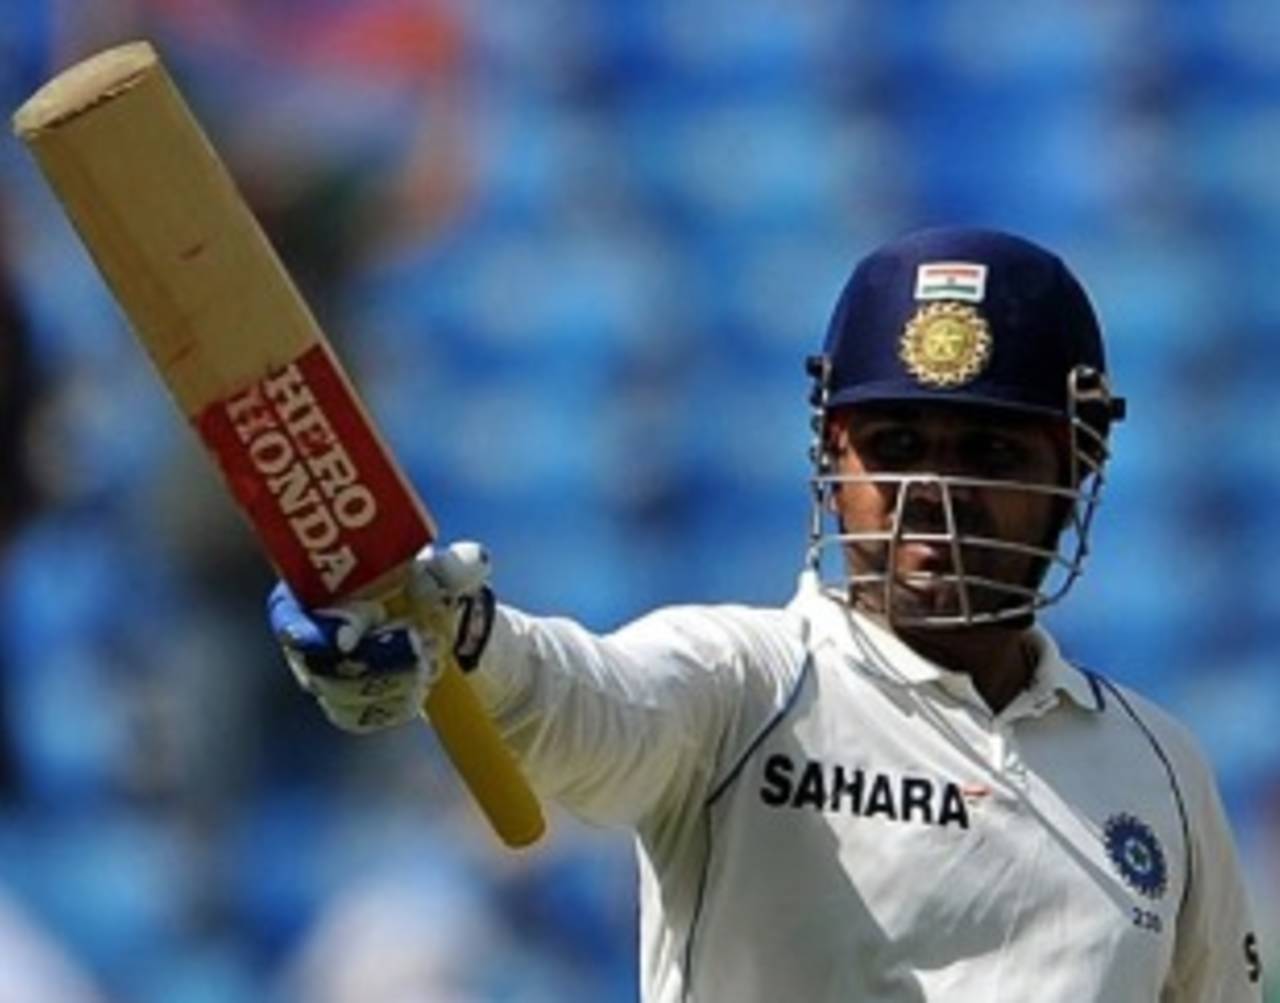 Virender Sehwag reaches his 18th Test century, India v South Africa, 1st Test, Nagpur, 3rd day, February 8, 2010